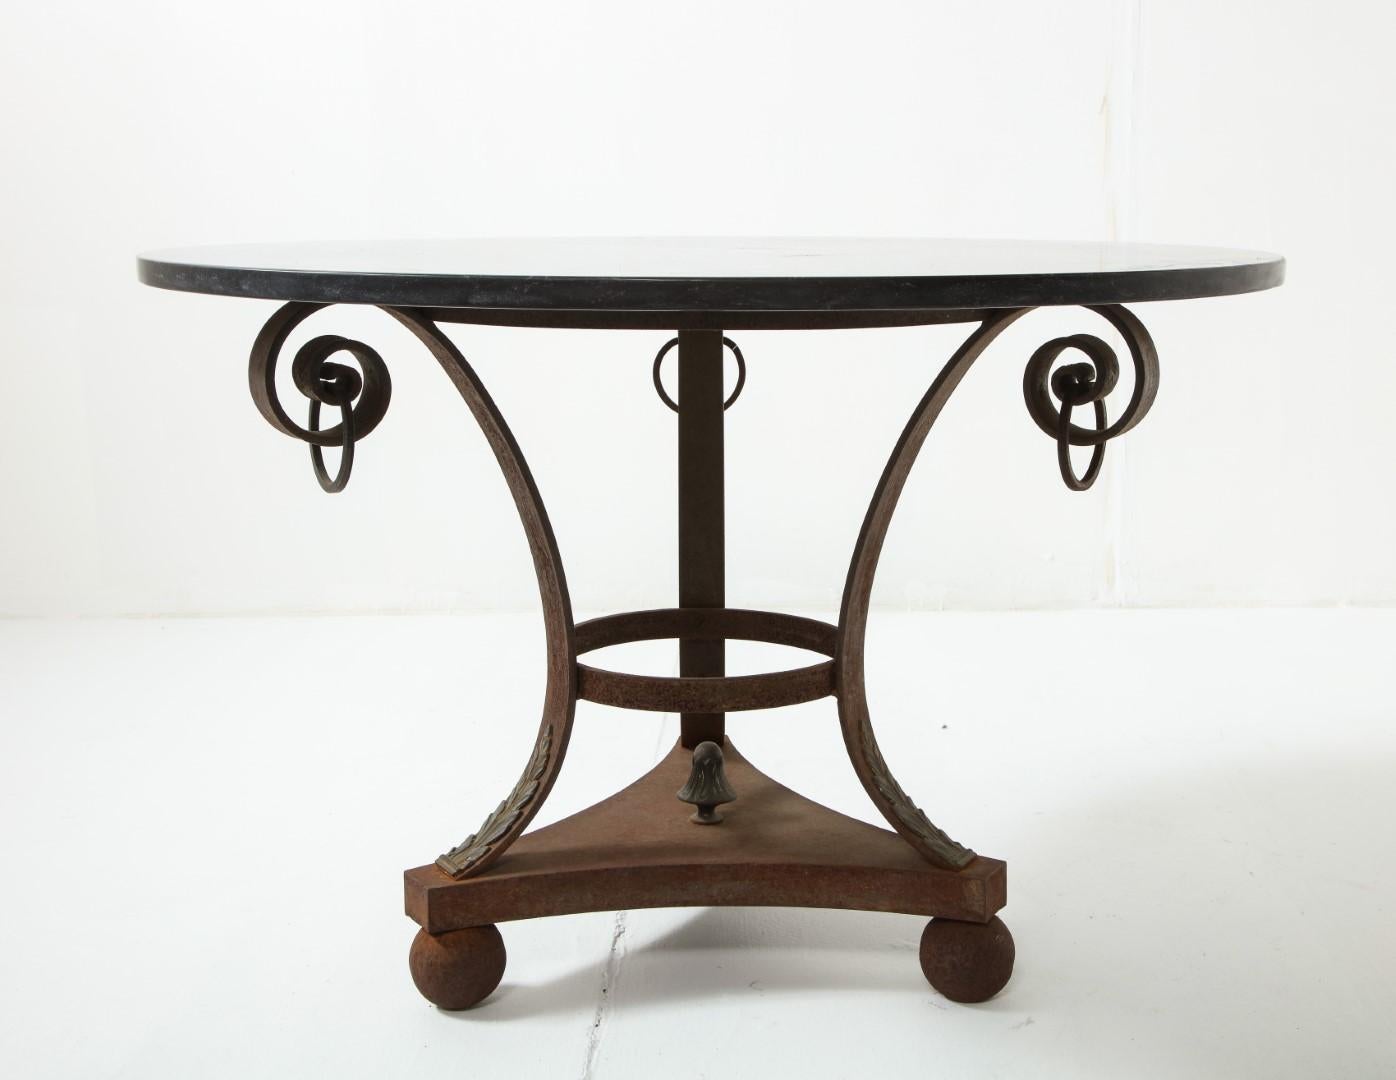 Vintage 20th century Italian Empire style outdoor coffee table with black marble top. Wrought iron base is rusted from outdoor use, scroll and ring details, three ball feet.